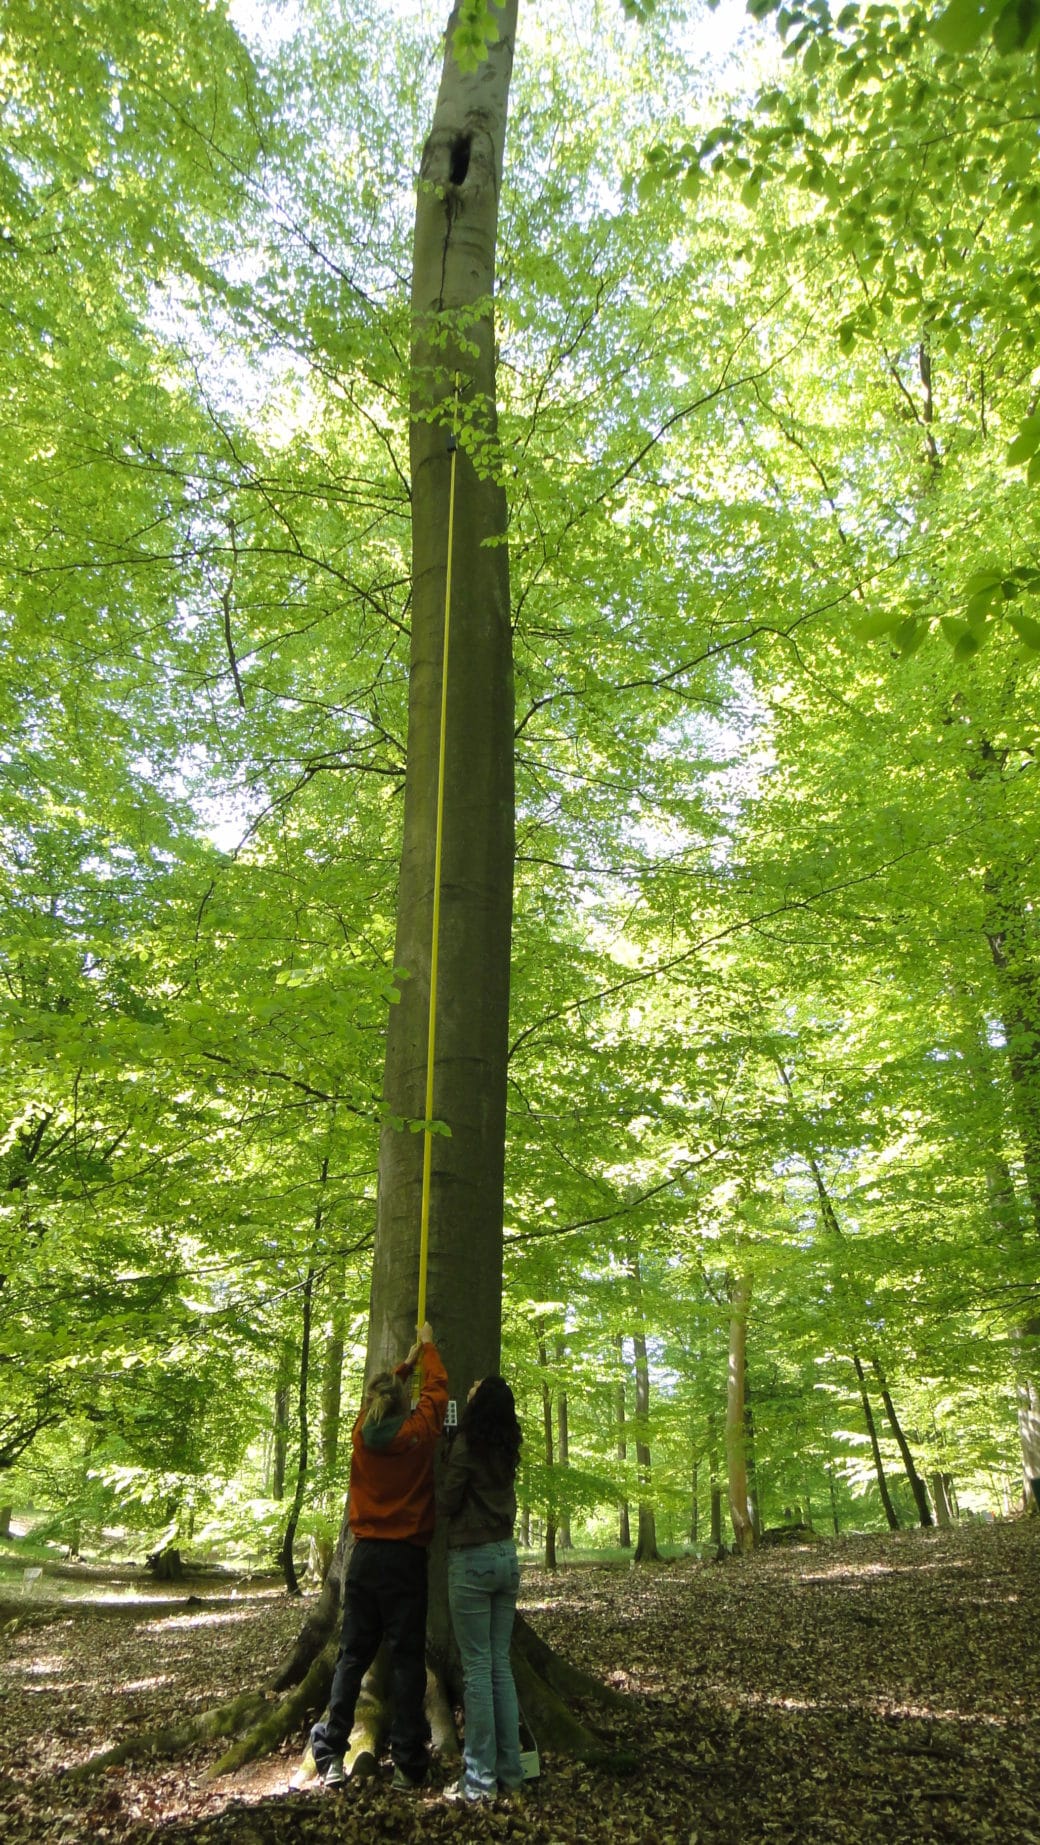 Picture: The photo shows two young female scientists standing in front of a beech tree in the forest in spring. One of the women is holding a yellow extendable pole, about 5 to 6 meters long, upwards to the tree trunk. At the end of the pole is a camera that is used to perform a tree cavity inspection to check the contents.